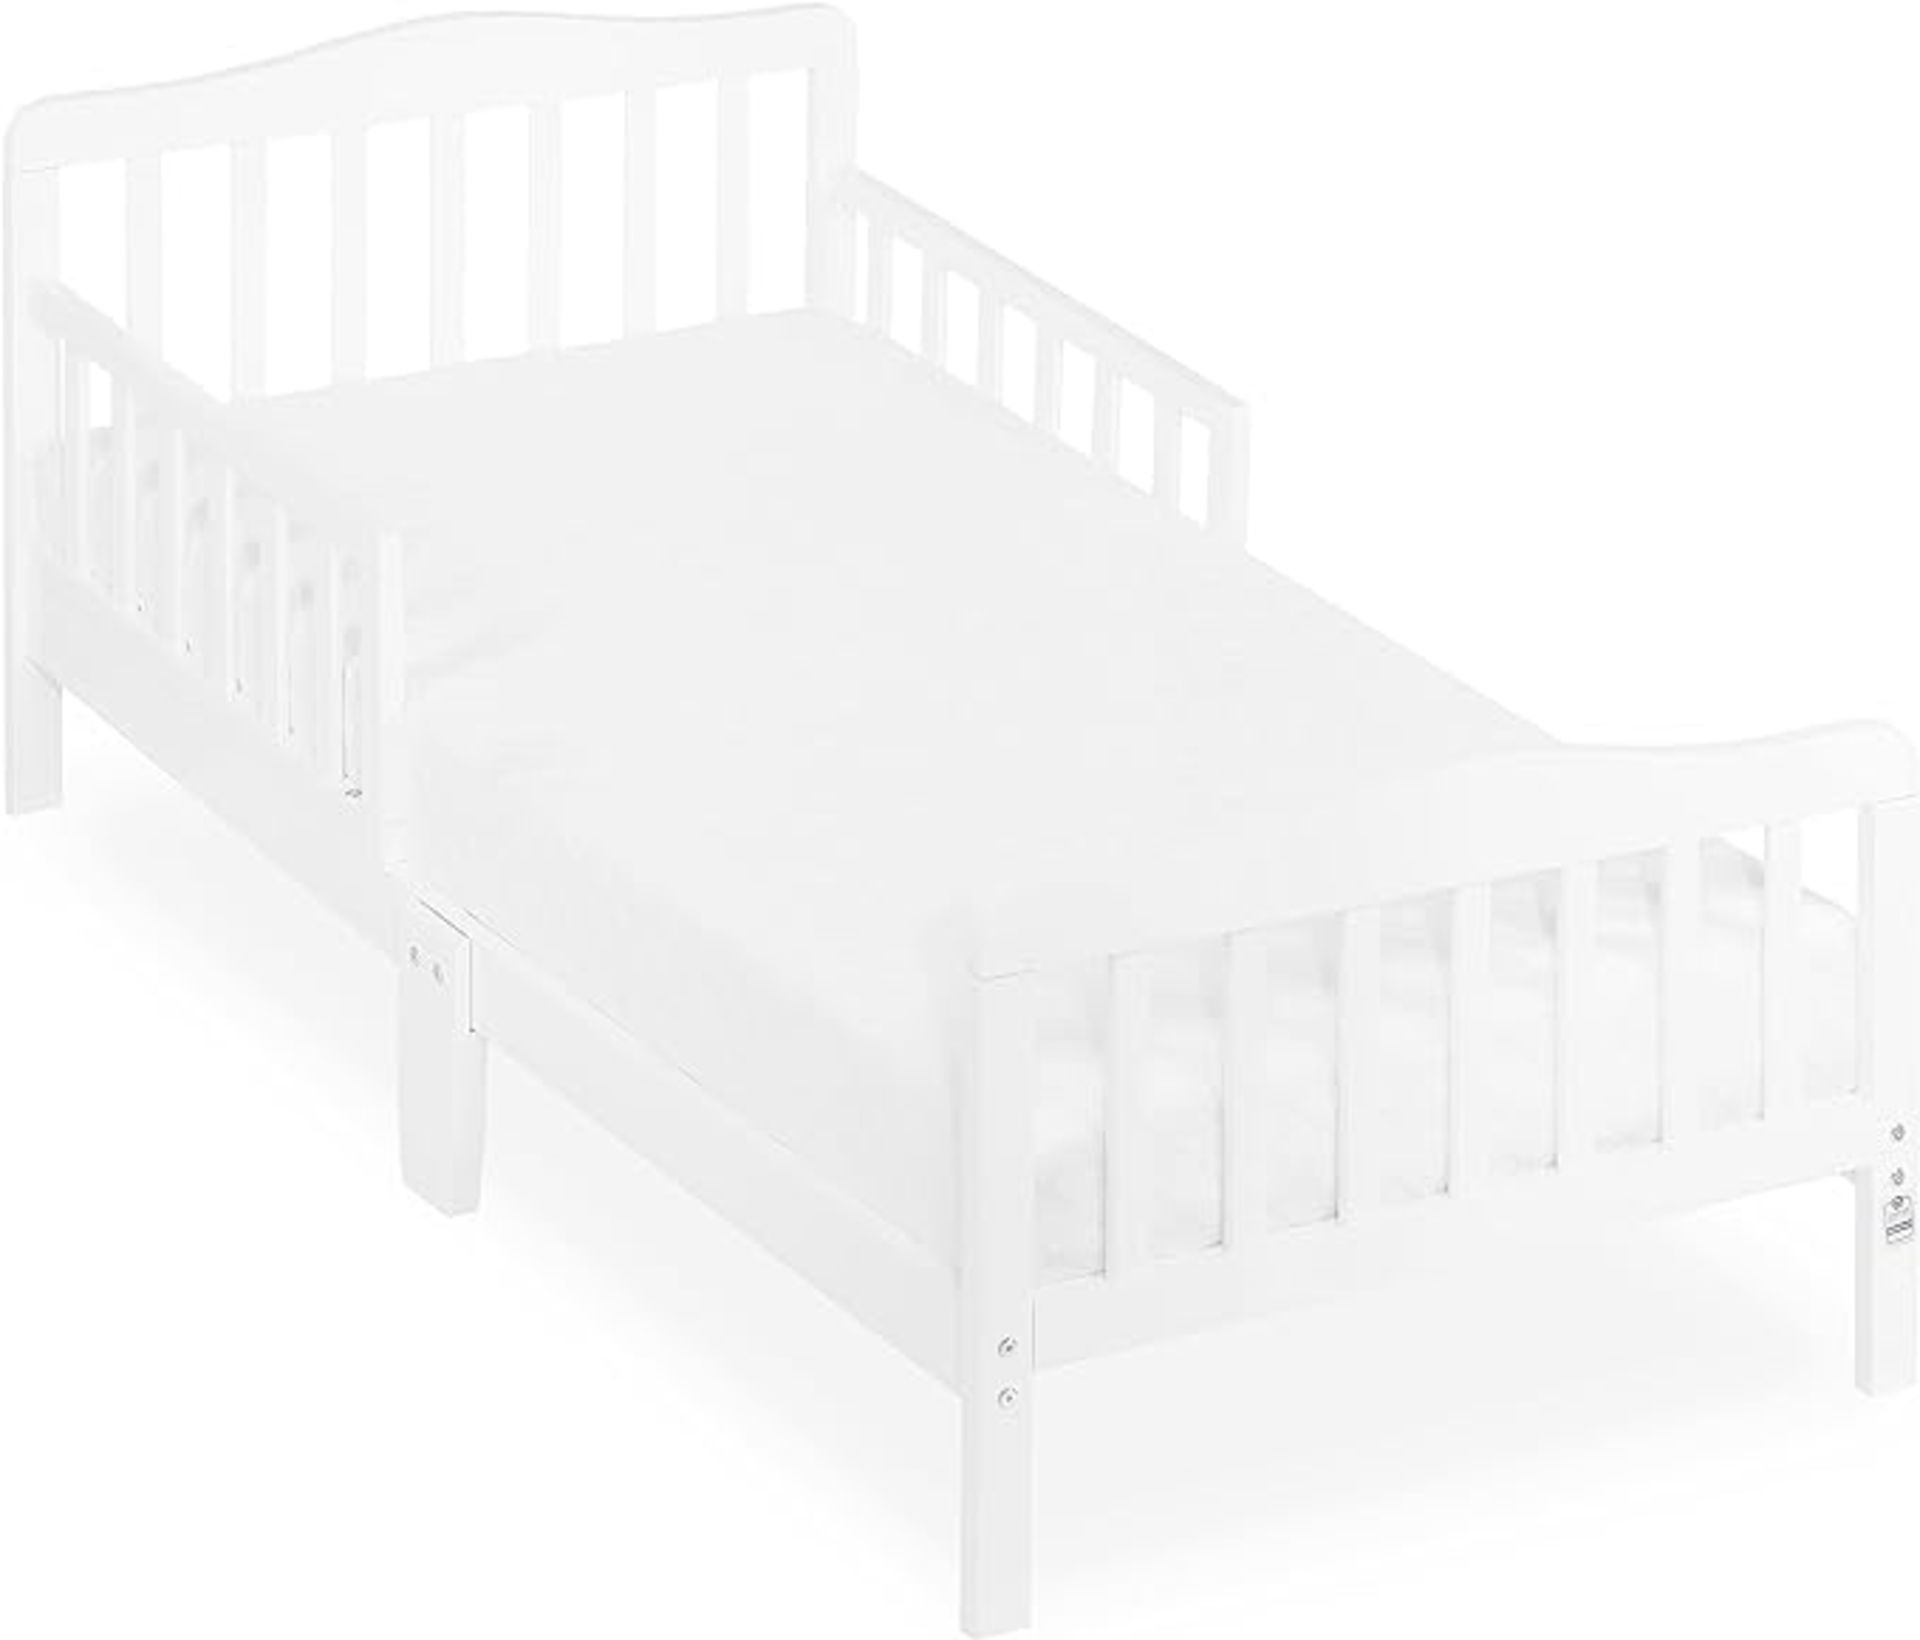 10 X Brand New Dream on Me Classic Toddler BedS. Product dimensionS - 144.8L x 71.1W x 76.2H CM - Image 4 of 5